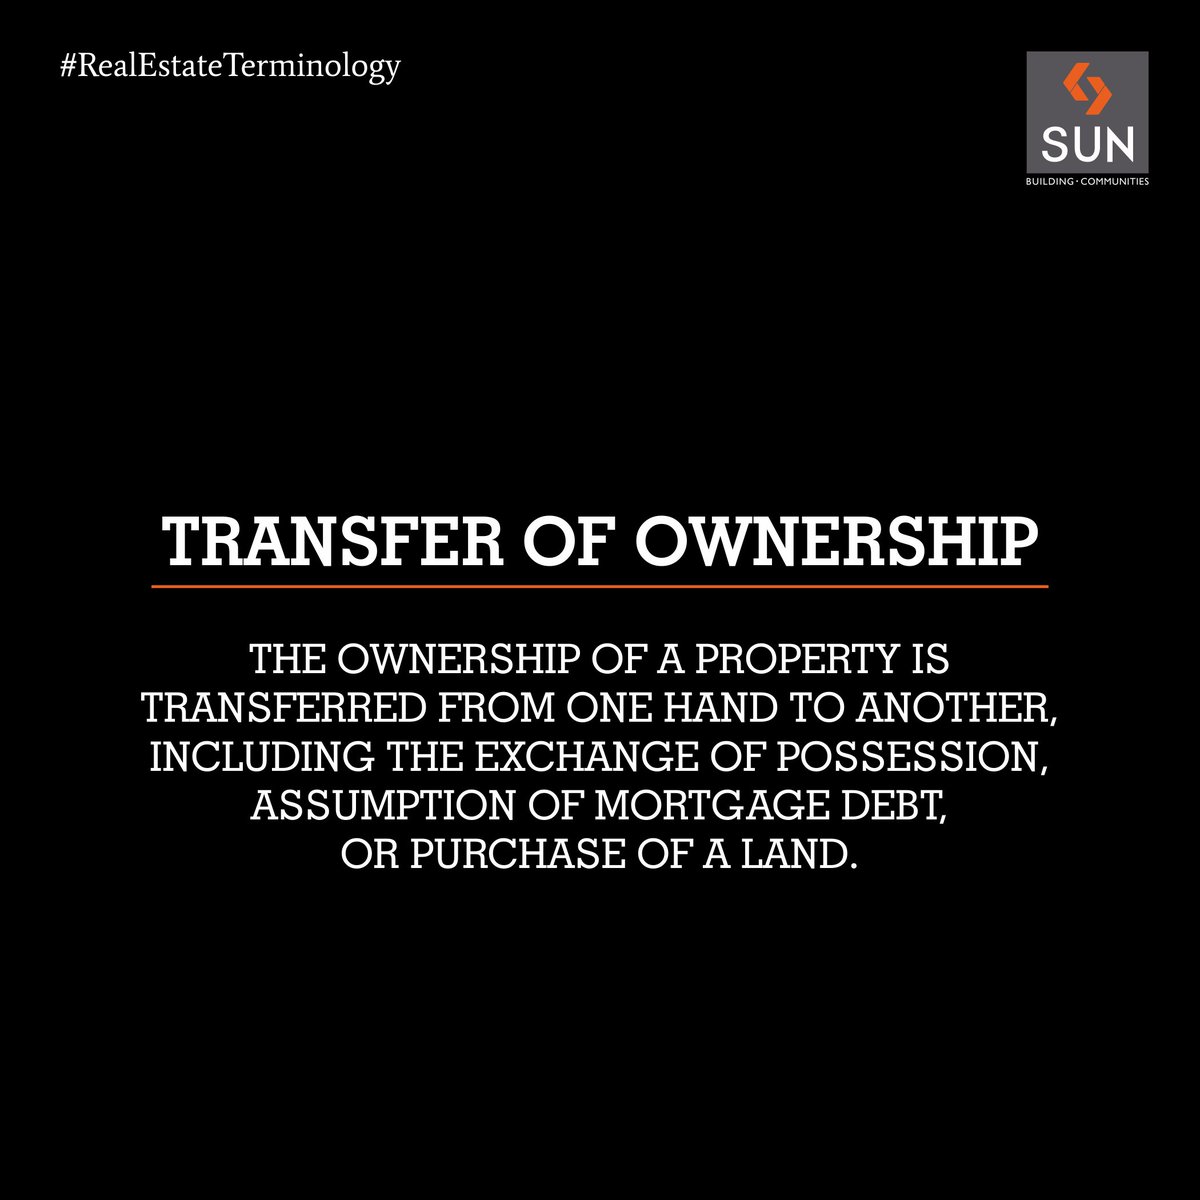 #TransferofOwnership is the purchase of a property or any exchange of possession under a property sales contract. https://t.co/nrDaPBlajw